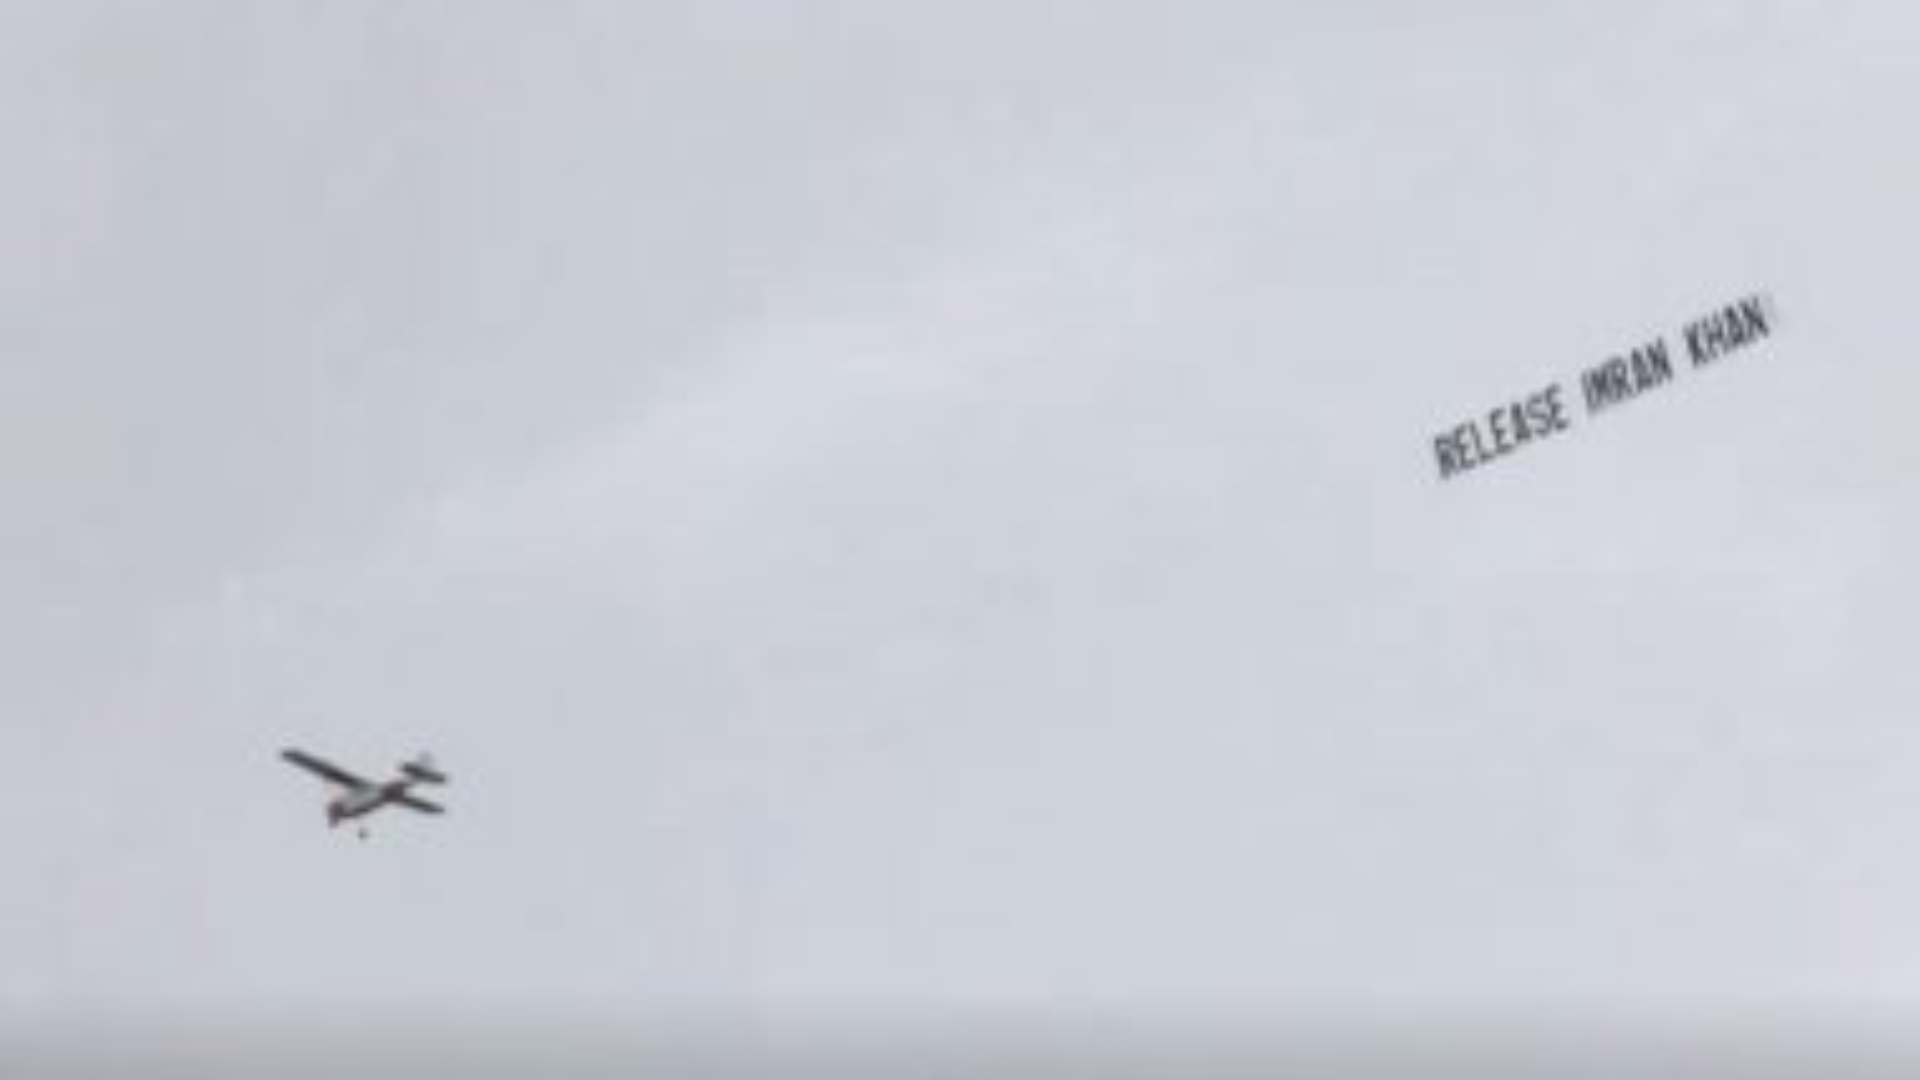 Watch: Aircraft Carrying ‘Release Imran Khan’ Message Spotted During India-Pakistan T20 World Cup Clash